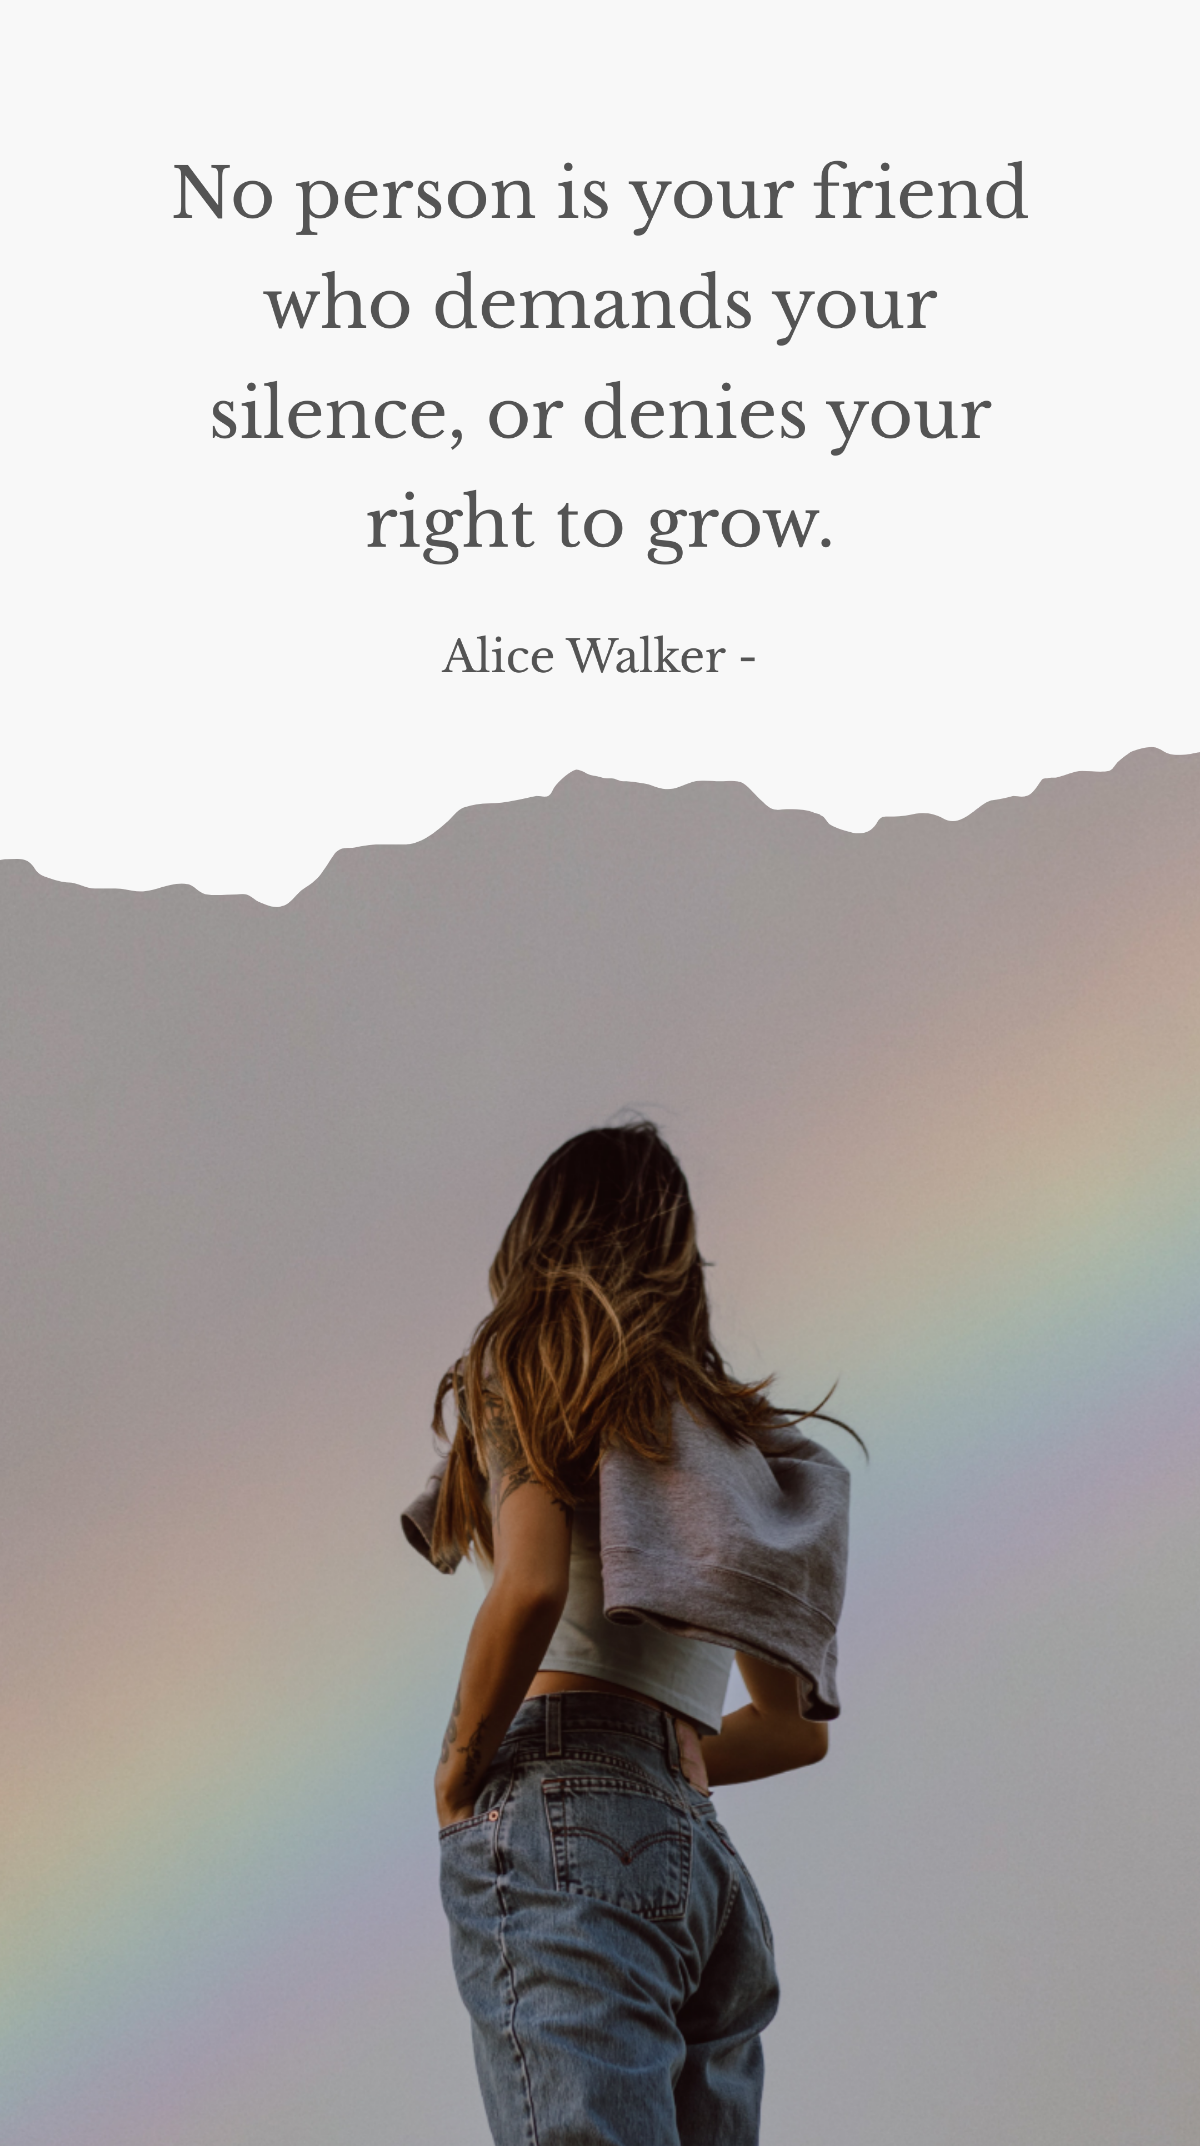 Alice Walker - No person is your friend who demands your silence, or denies your right to grow. Template